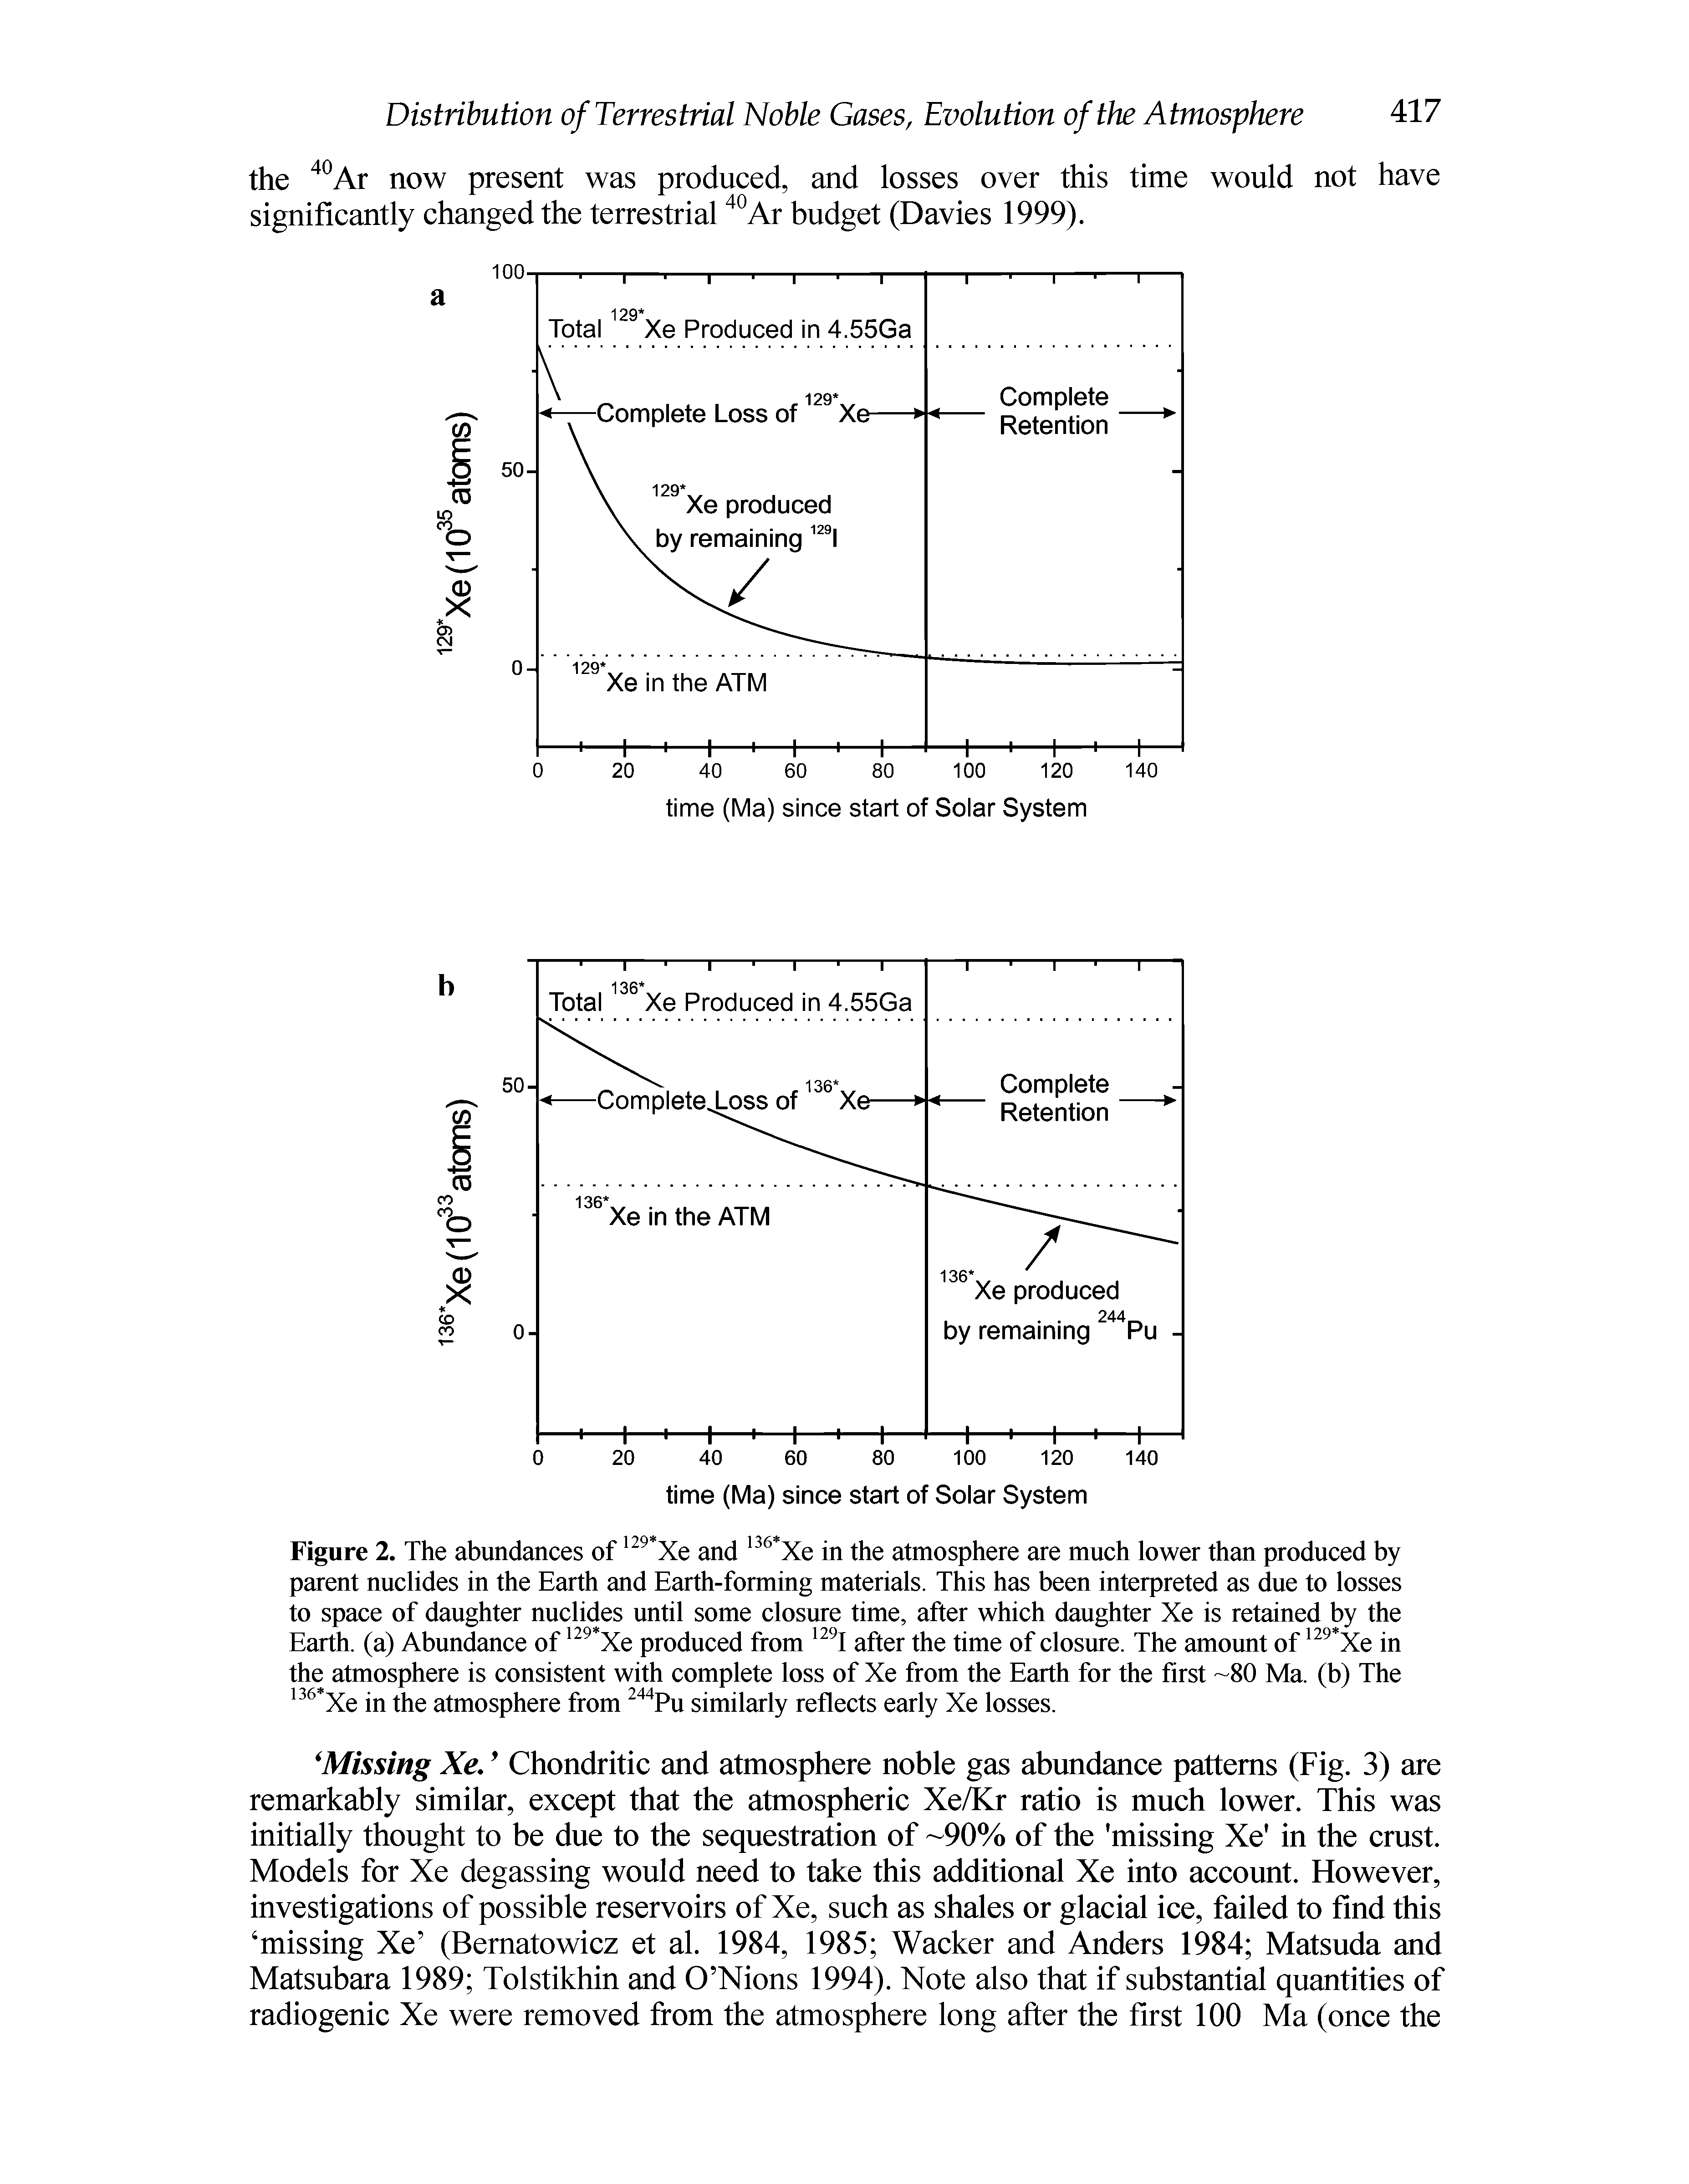 Figure 2. The abundances of Xe and Xe in the atmosphere are much lower than produced by parent nuclides in the Earth and Earth-forming materials. This has been interpreted as due to losses to space of daughter nuclides until some closure time, after which daughter Xe is retained by the Earth, (a) Abundance of Xe produced from after the time of closure. The amount of Xe in the atmosphere is consistent with complete loss of Xe from the Earth for the first 80 Ma. (b) The Xe in the atmosphere from similarly reflects early Xe losses.